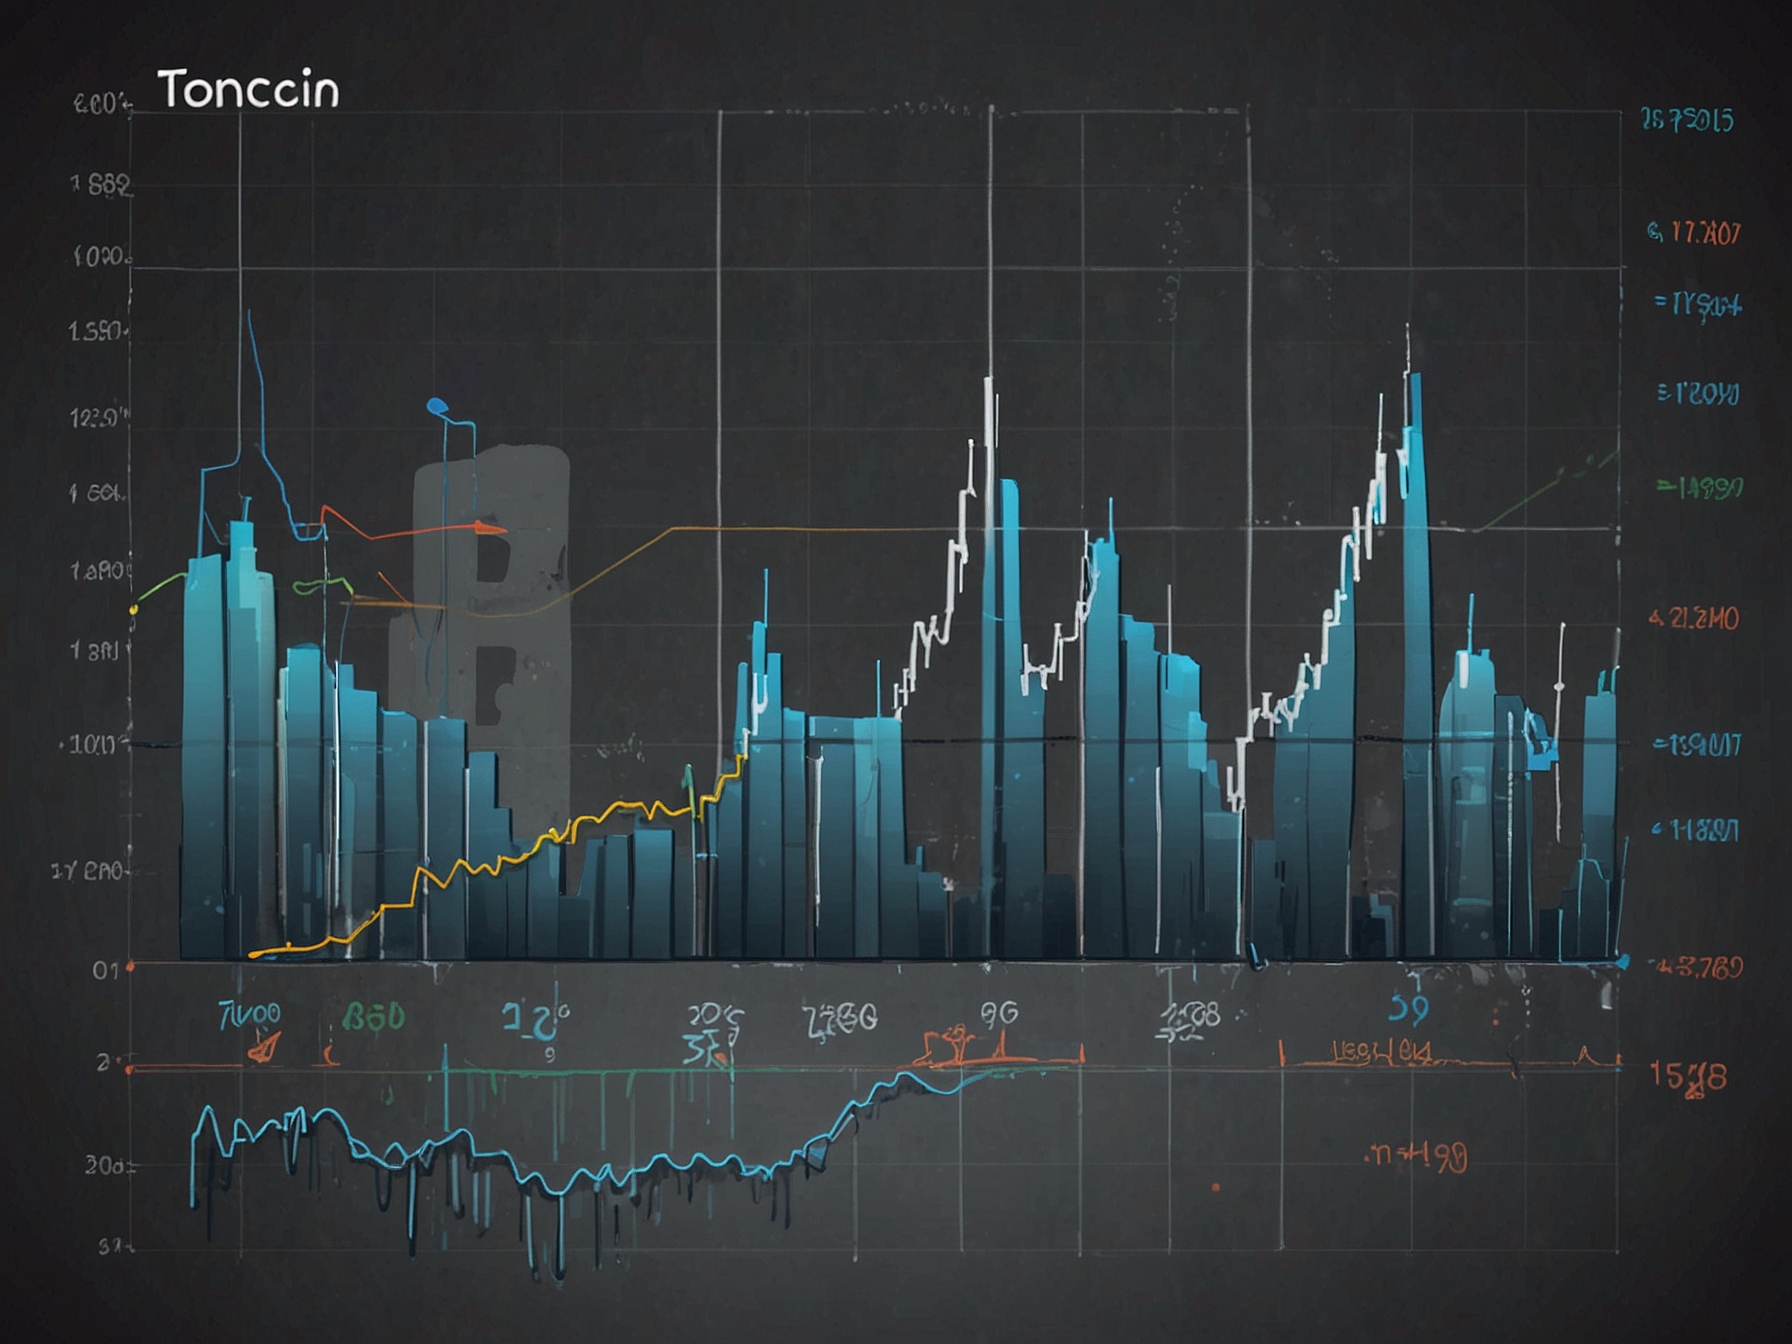 A line graph showing the recent 24-hour and one-week price decline of Toncoin, highlighting the steep drop and overall downward trend in the market.